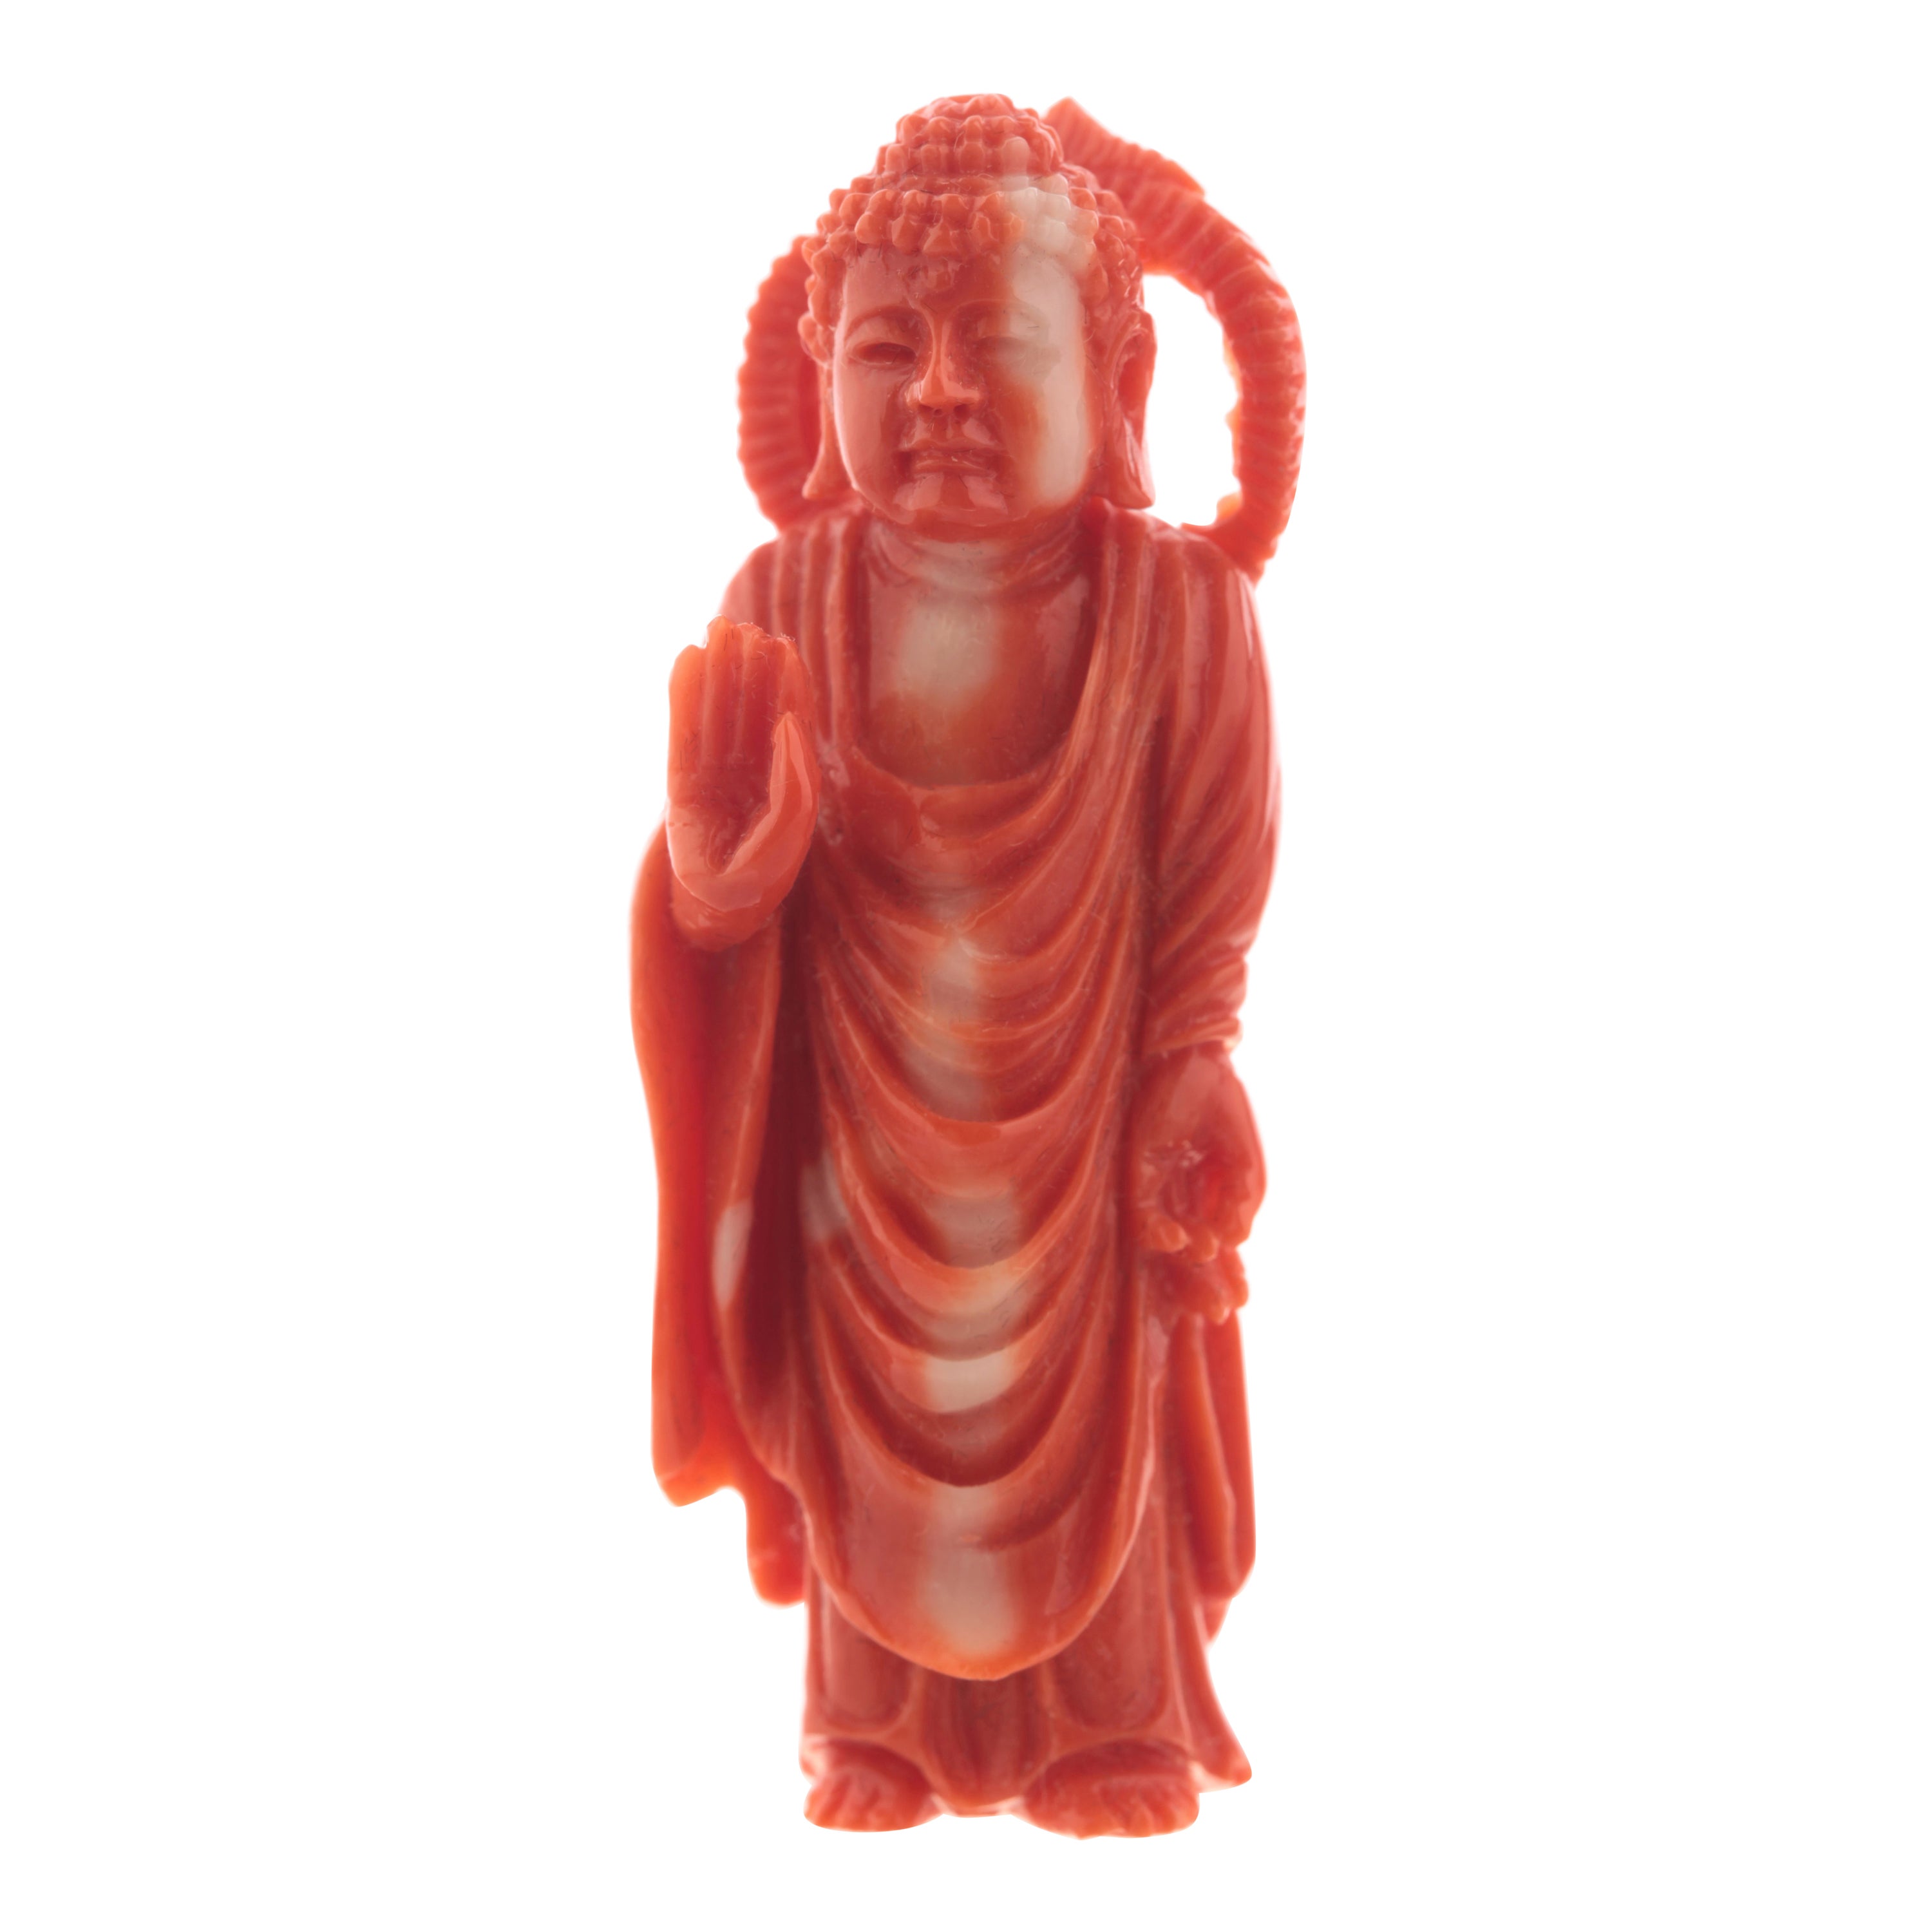 Buddhist Monk Carved Asian Decorative Art Statue Sculpture Natural Red Cor For Sale